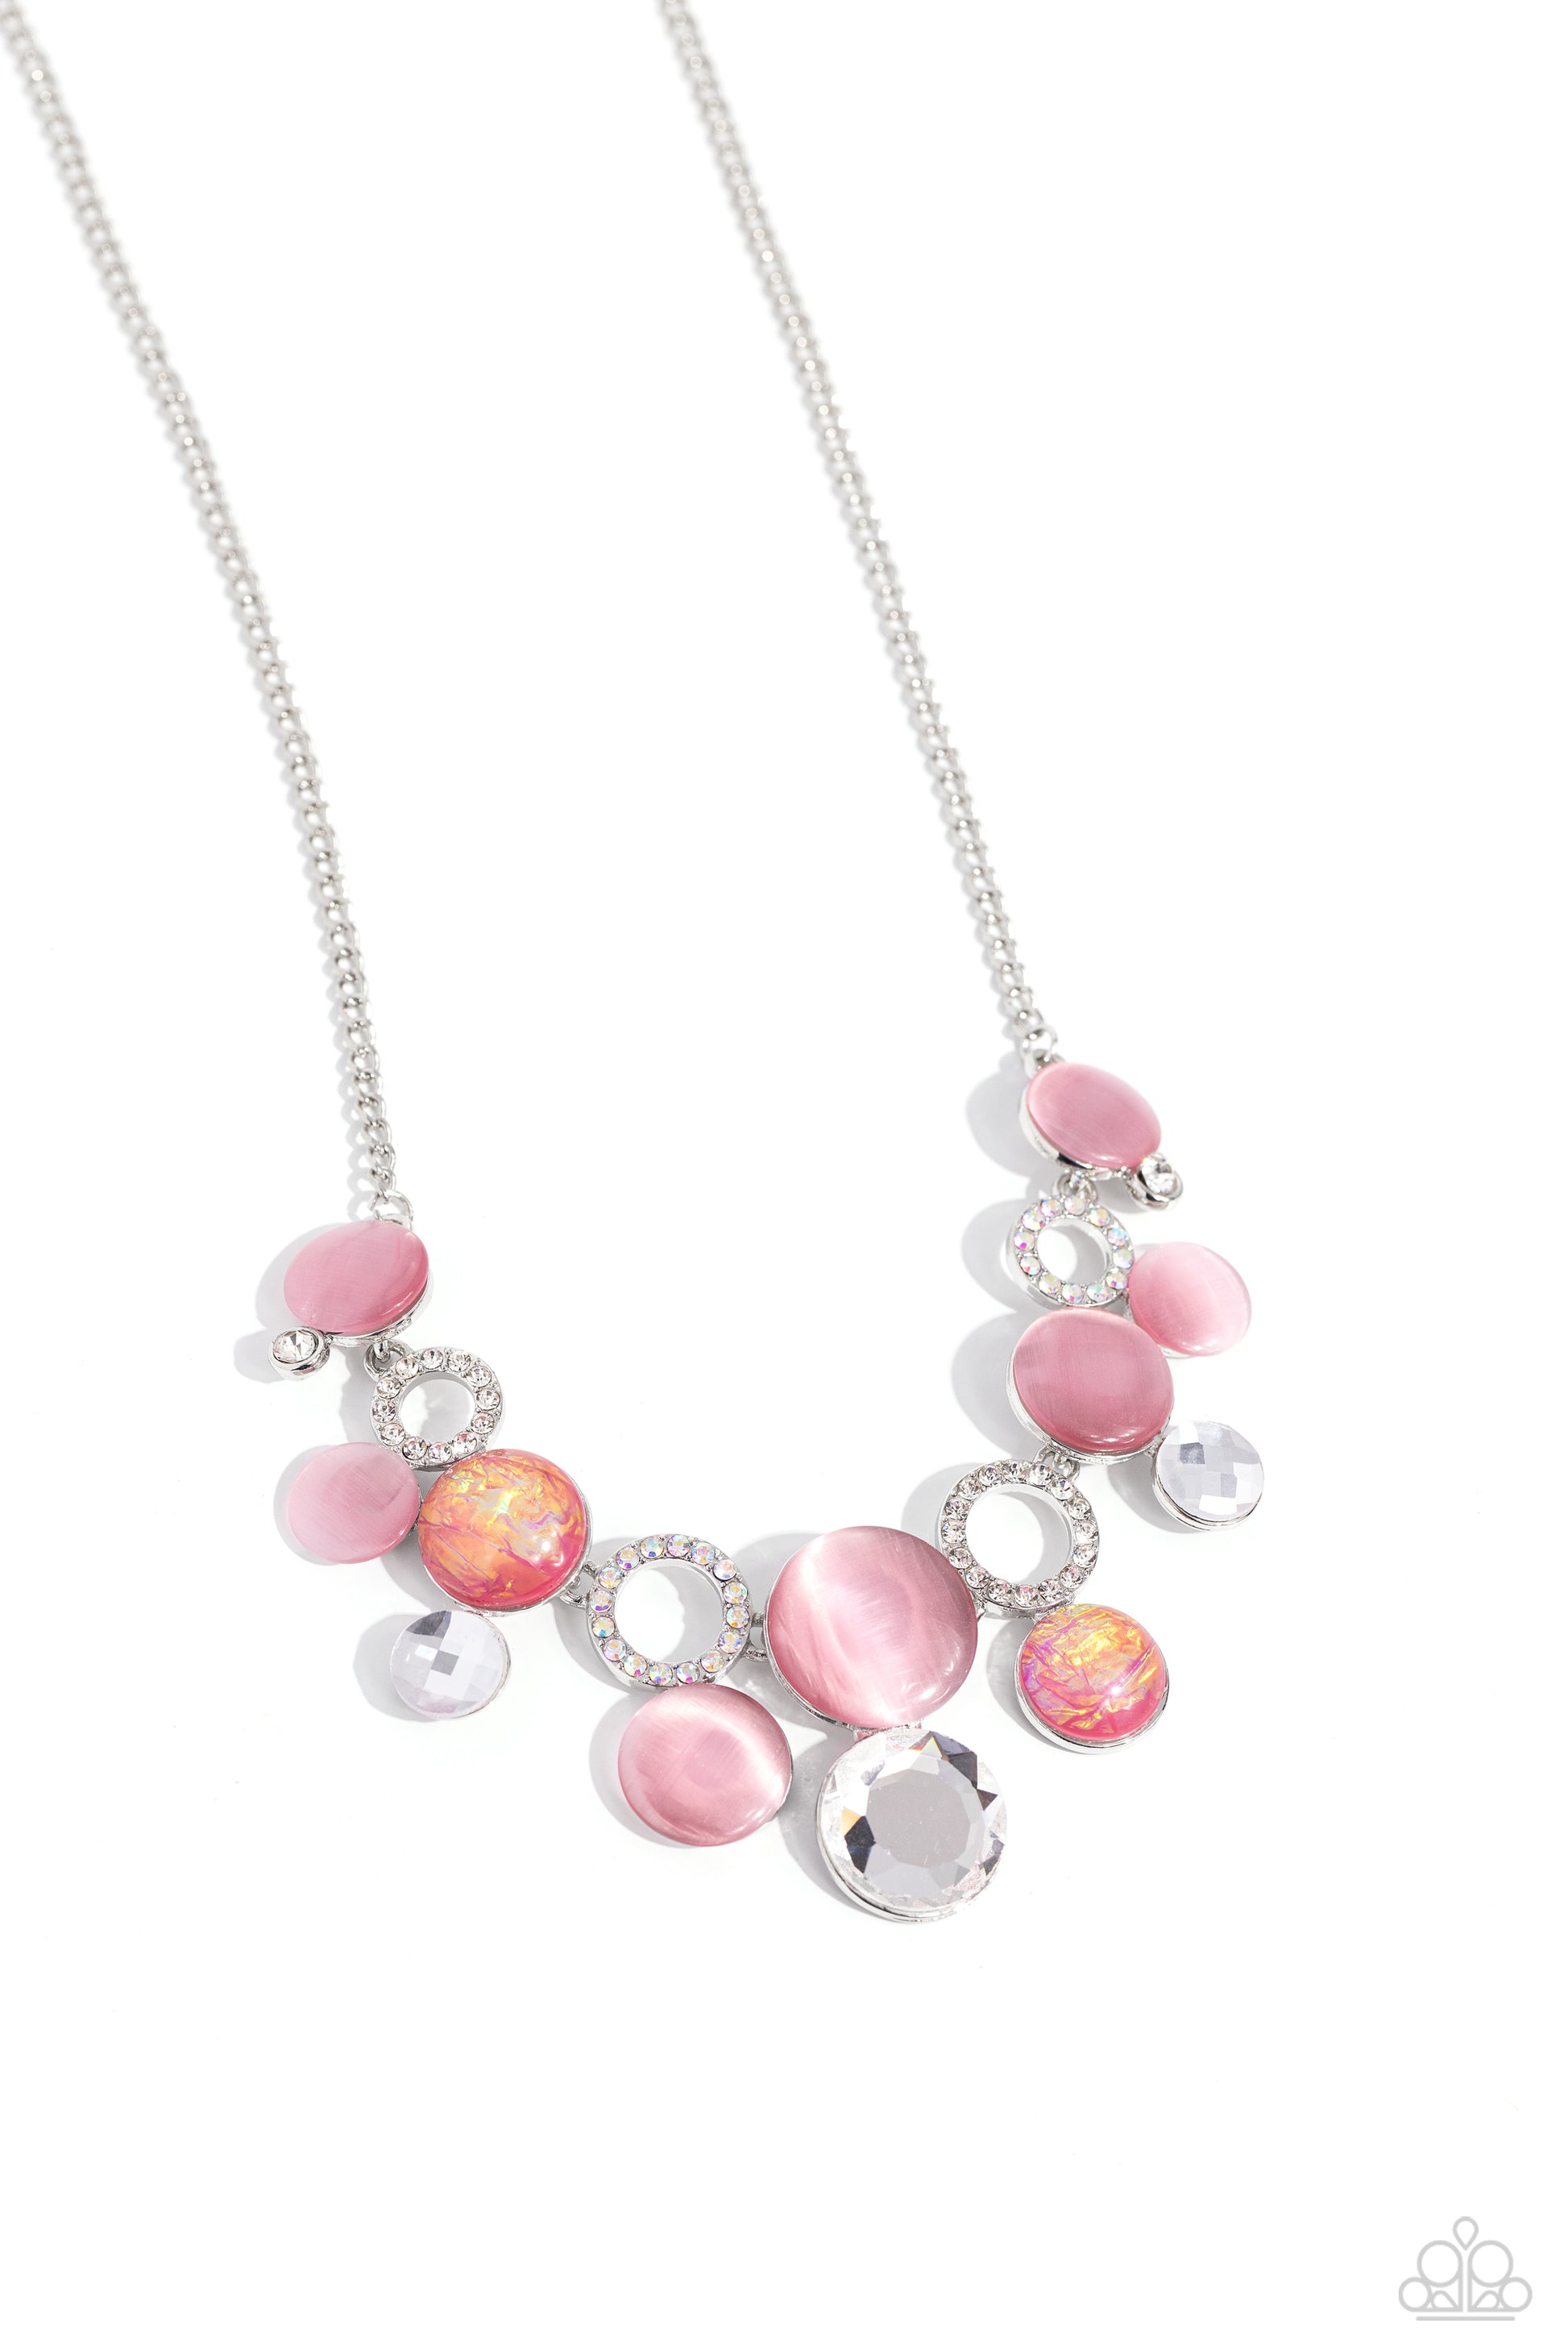 Paparazzi Accessories - Corporate Color - Pink Necklace a mismatched collection of pink cat's eye stones, white rhinestones, textured white gems, iridescent and white rhinestone-encrusted silver rings, and pink opalescent, refracted shimmer beads delicately connect into a bubbly clustered pendant below the collar, creating a colorful statement piece. Features an adjustable clasp closure. Due to its prismatic palette, color may vary.  Sold as one individual necklace. Includes one pair of matching earrings.